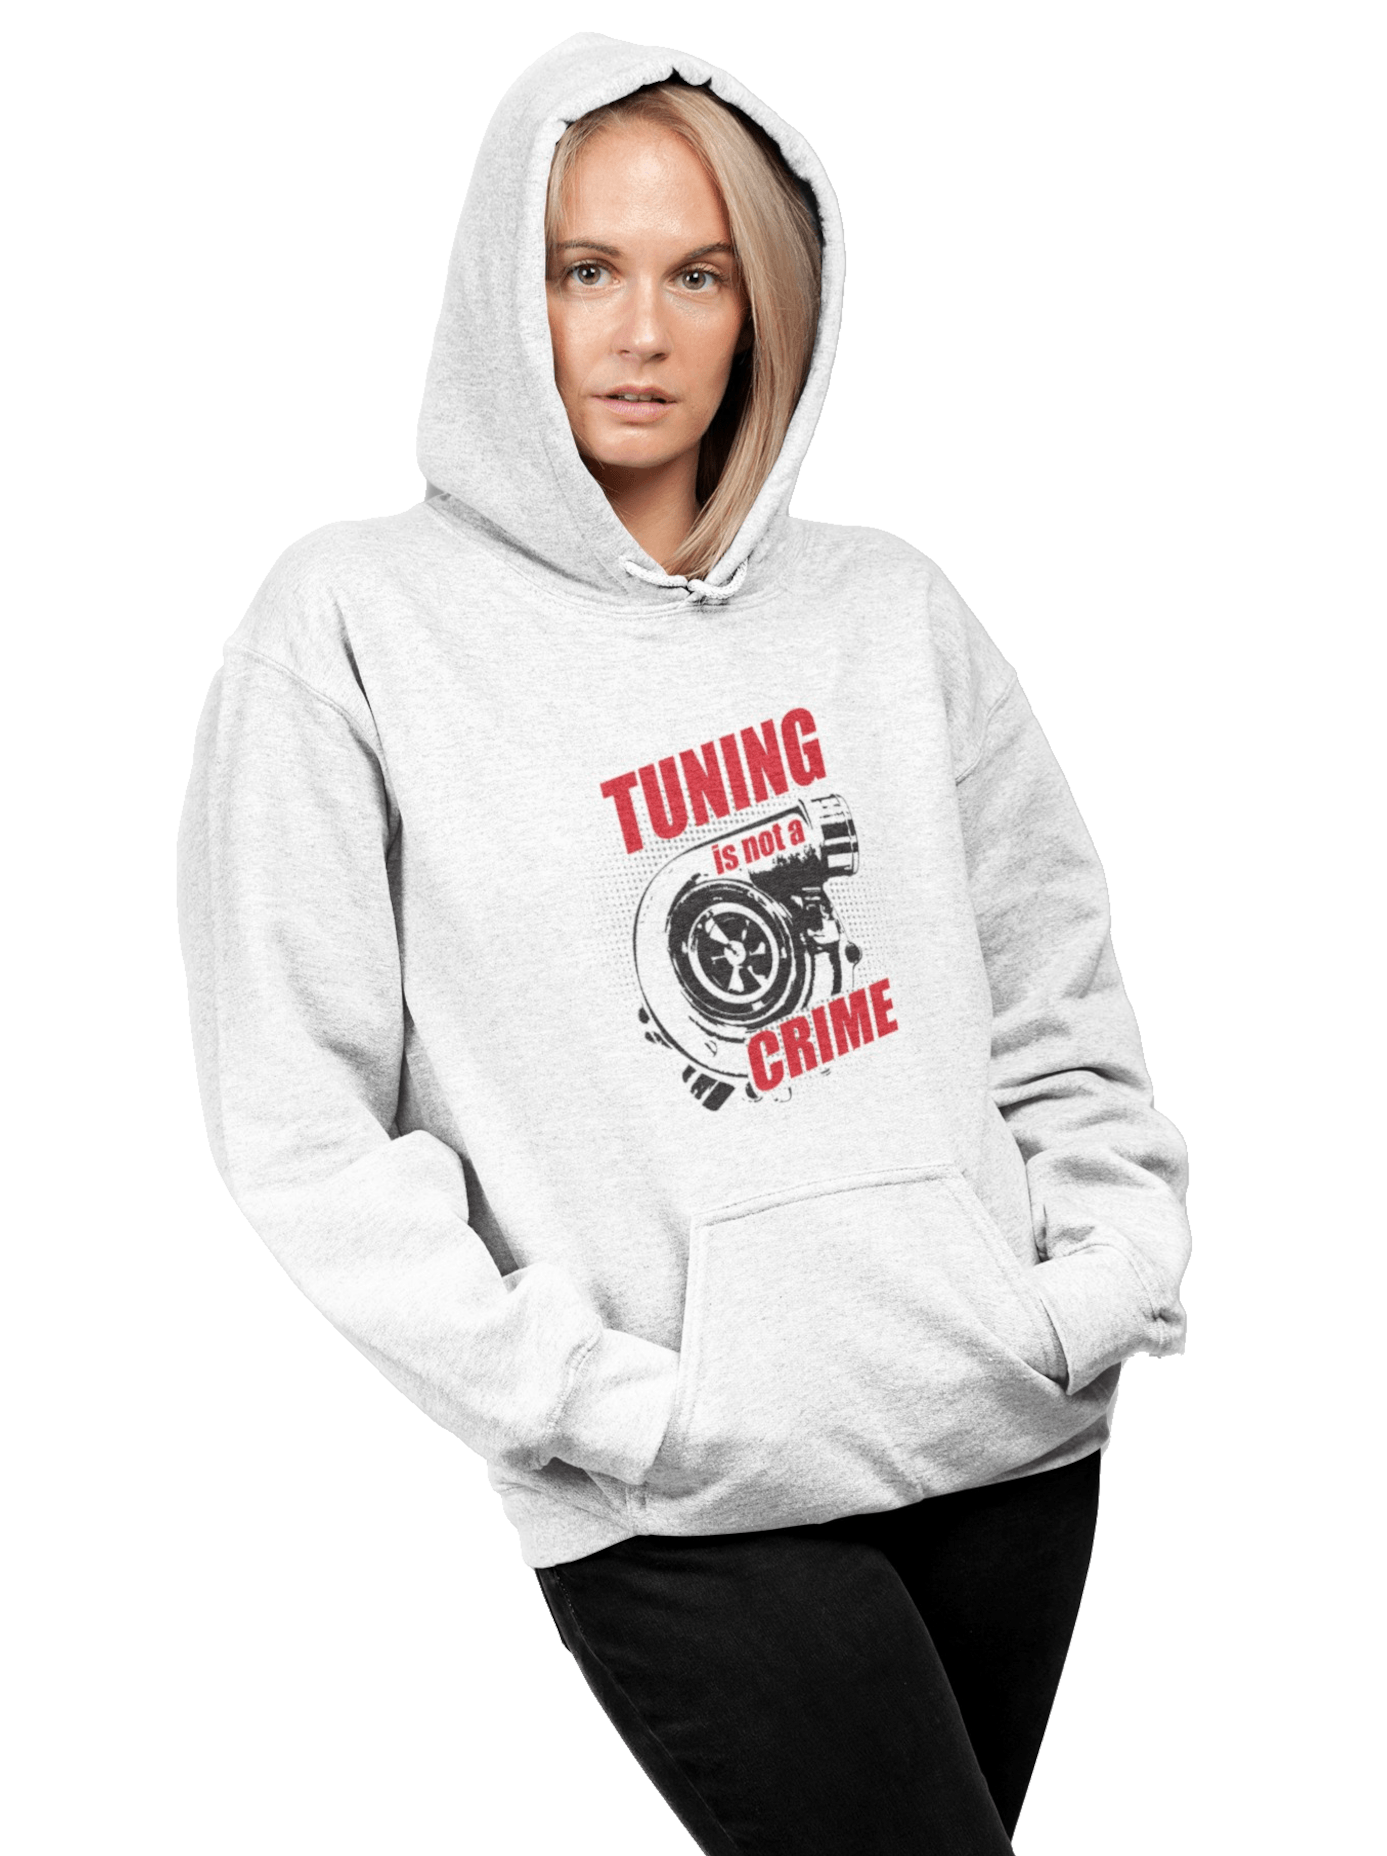 Tuning is not a Crime - Unisex Hoodie von TurboArts